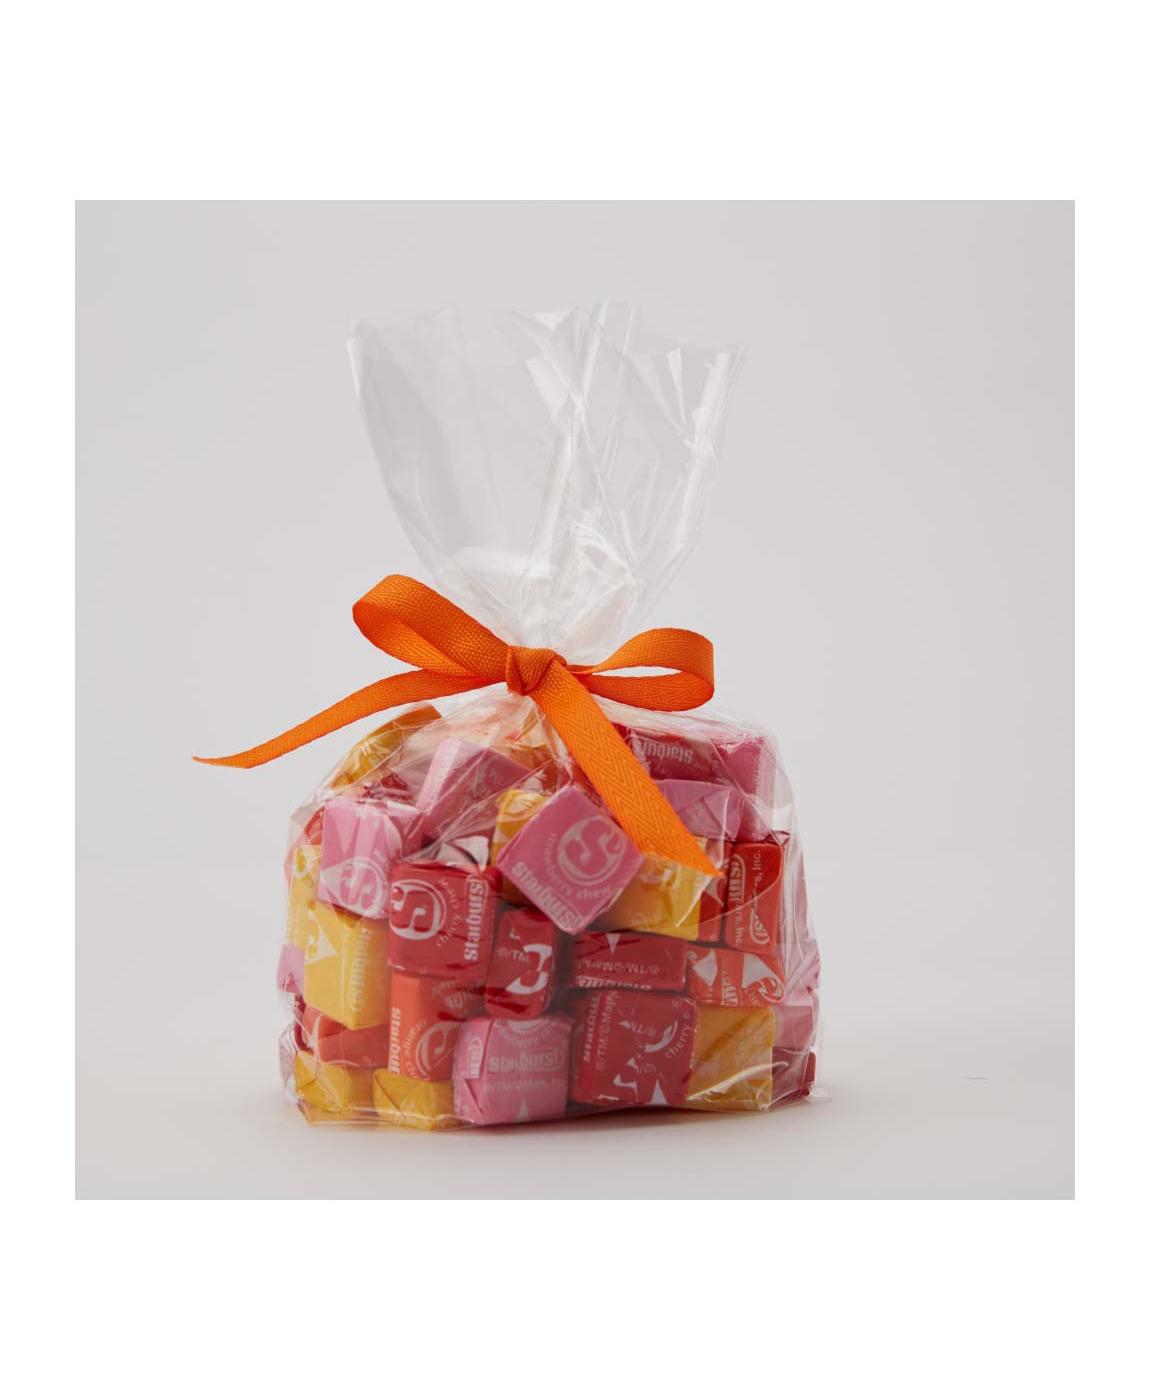 Starburst Tropical Fruit Chews Candy Bag; image 7 of 7